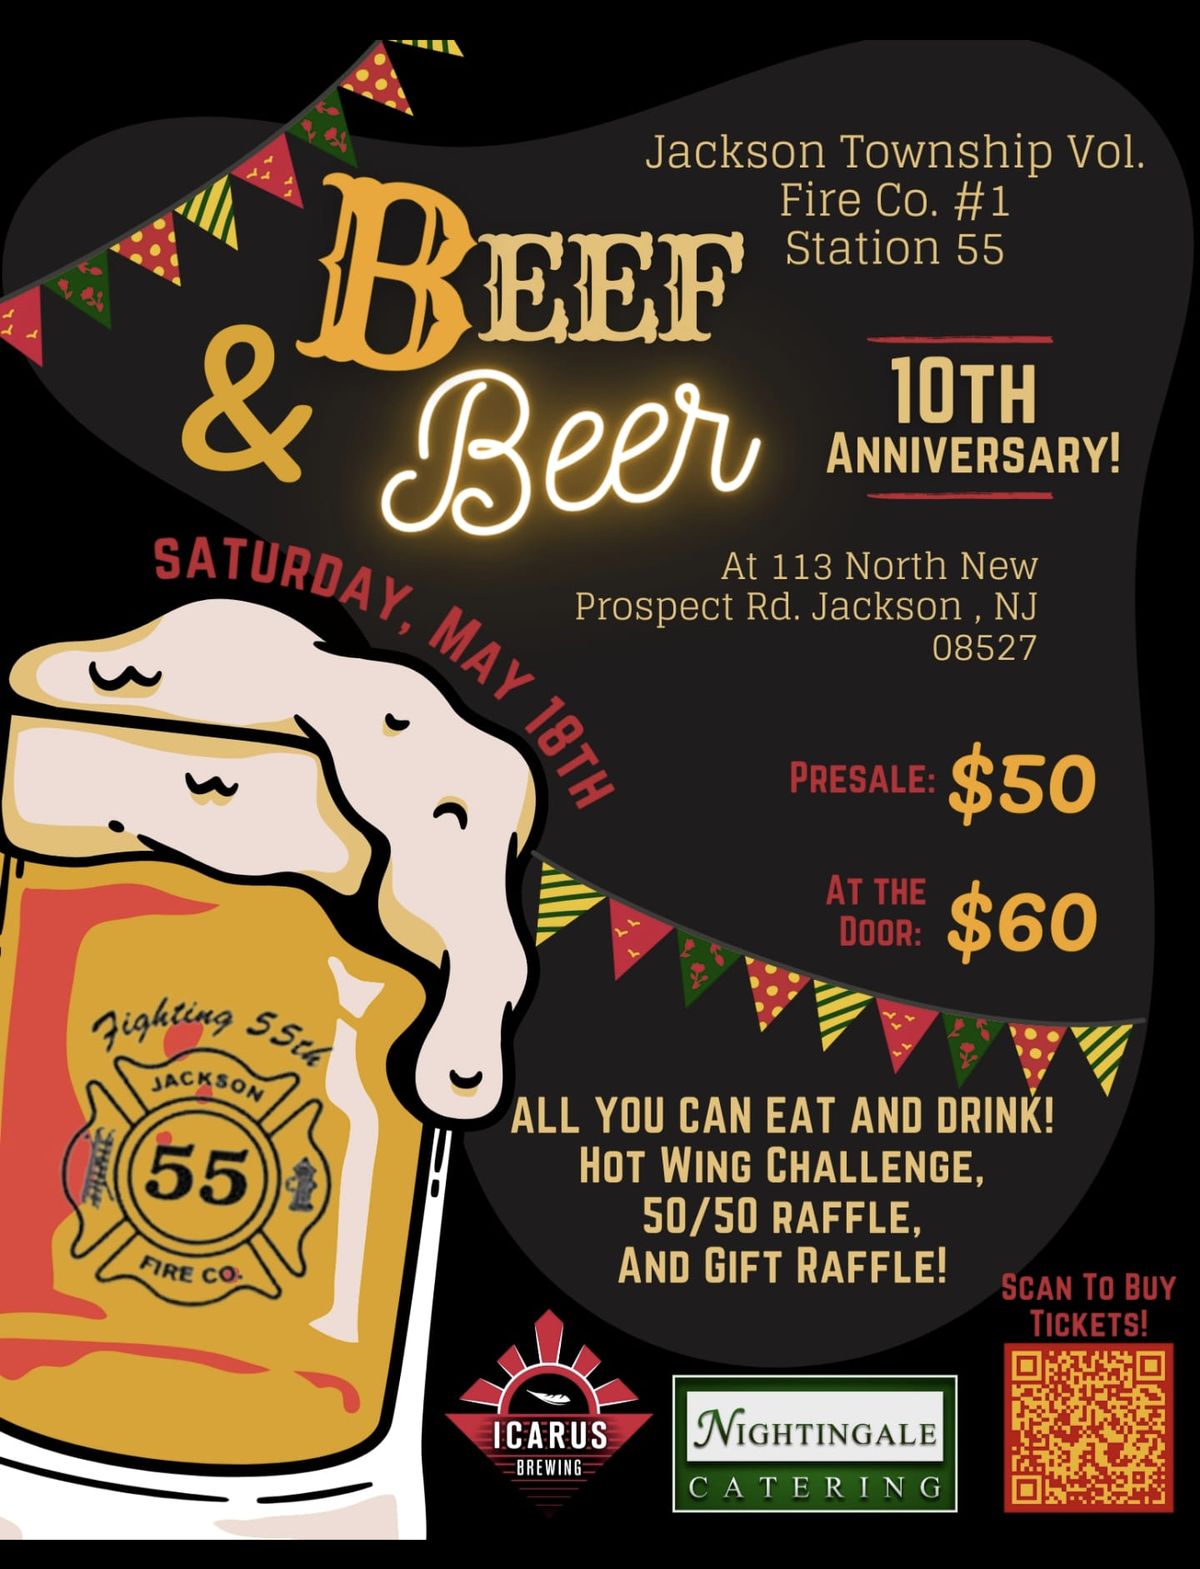 Jackson Twp. Vol. Fire Co. #1 Station 55's 10th Annual Beef and Beer 